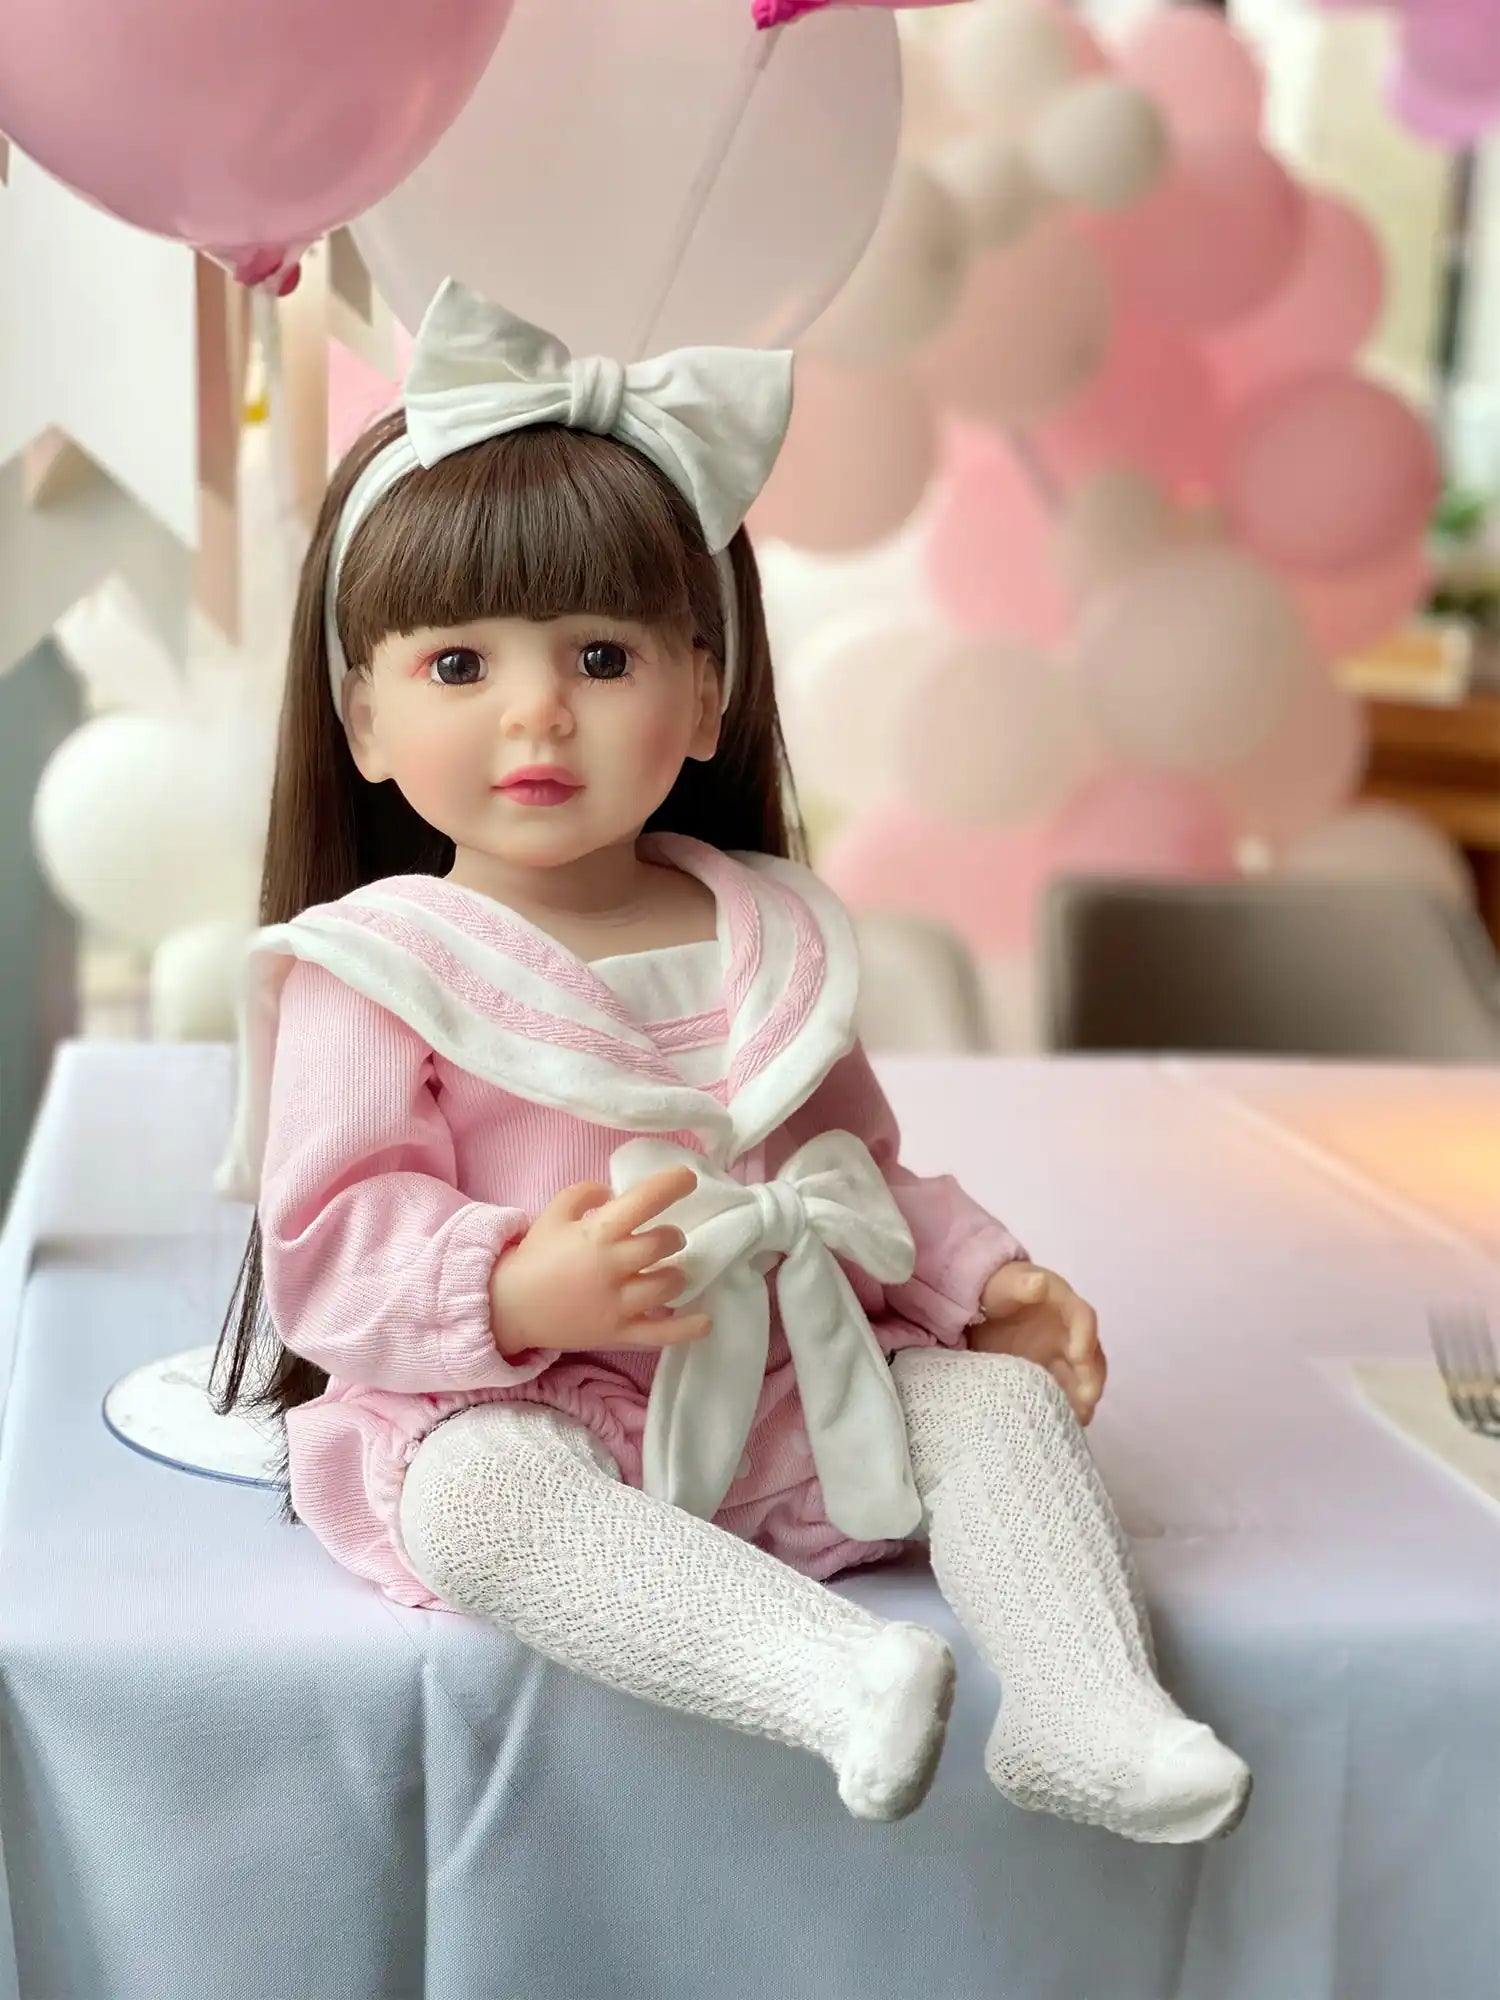 Lifelike doll with dark hair and a white bow, sitting on a wooden bench.